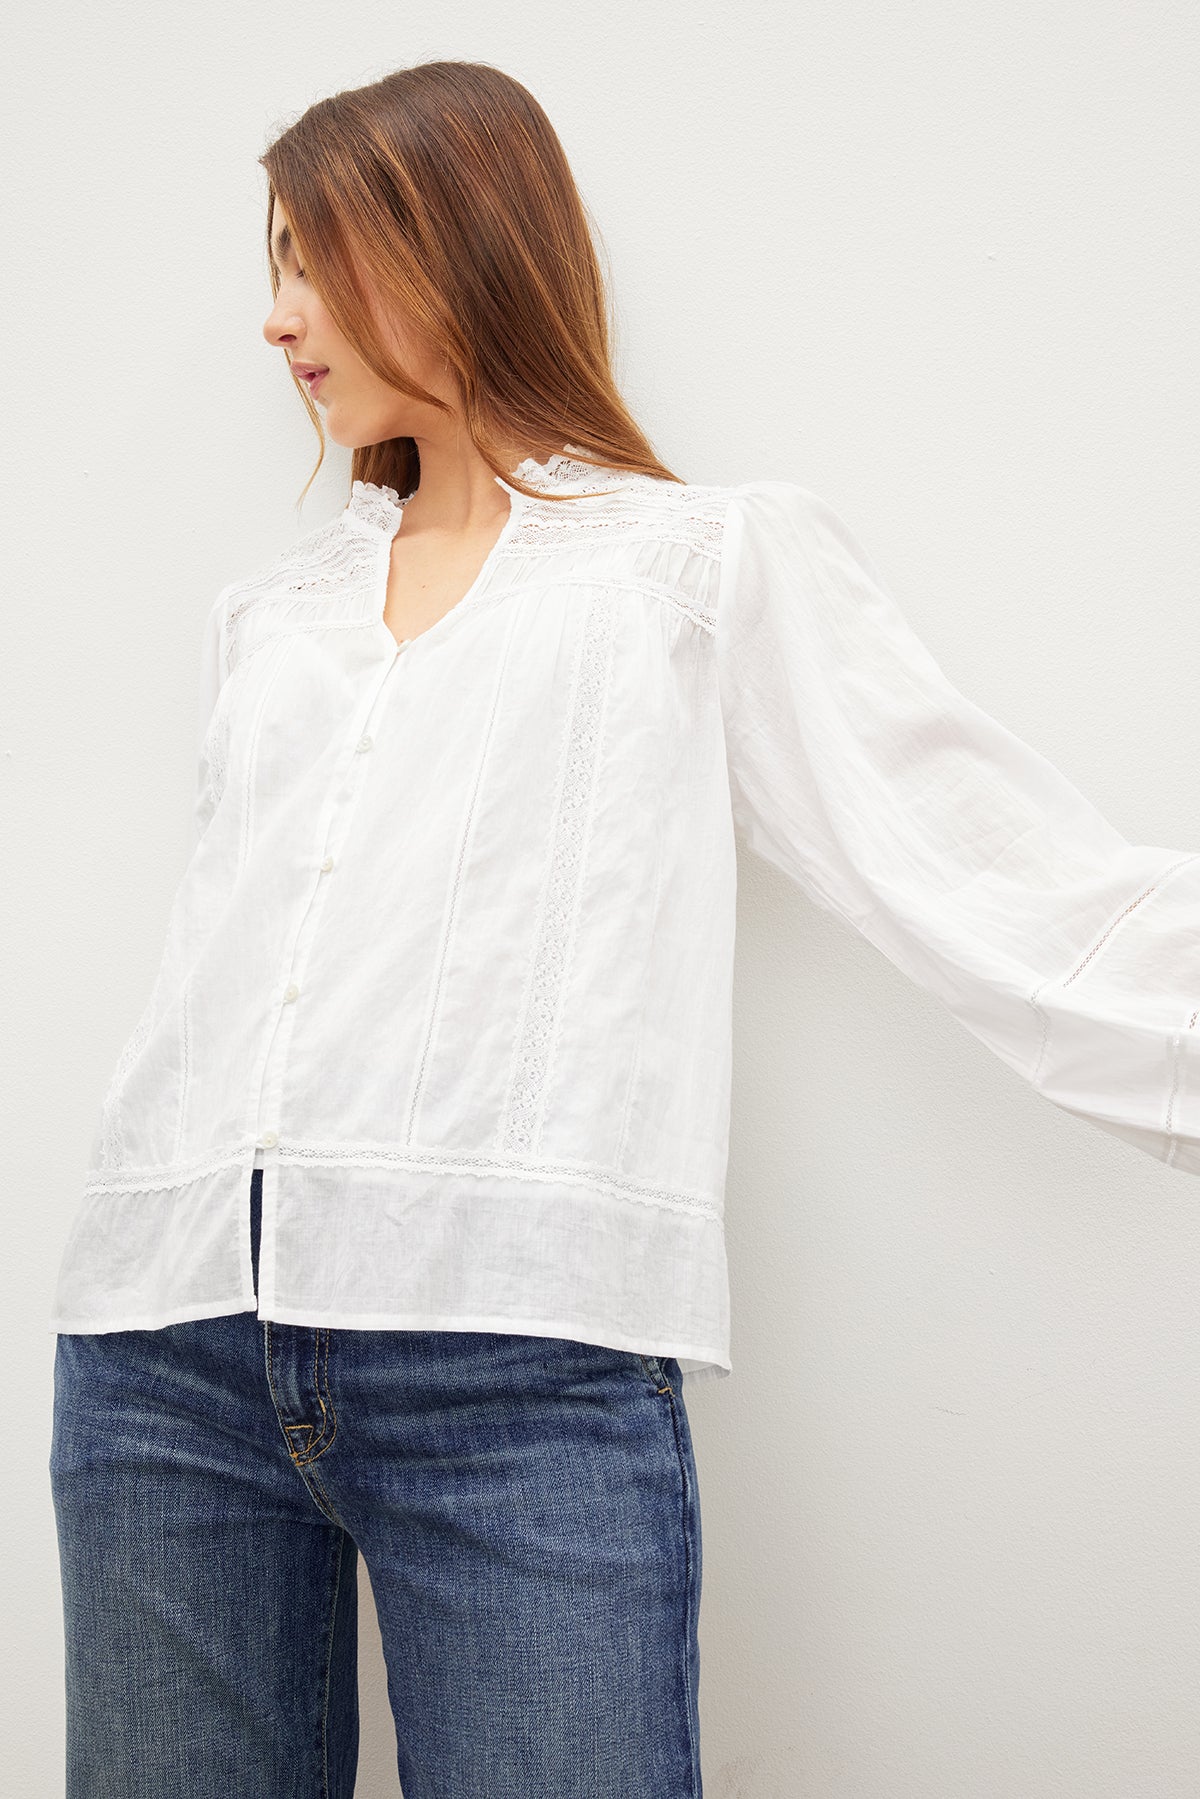   A woman in a LIAM COTTON LACE BUTTON FRONT TOP by Velvet by Graham & Spencer. 